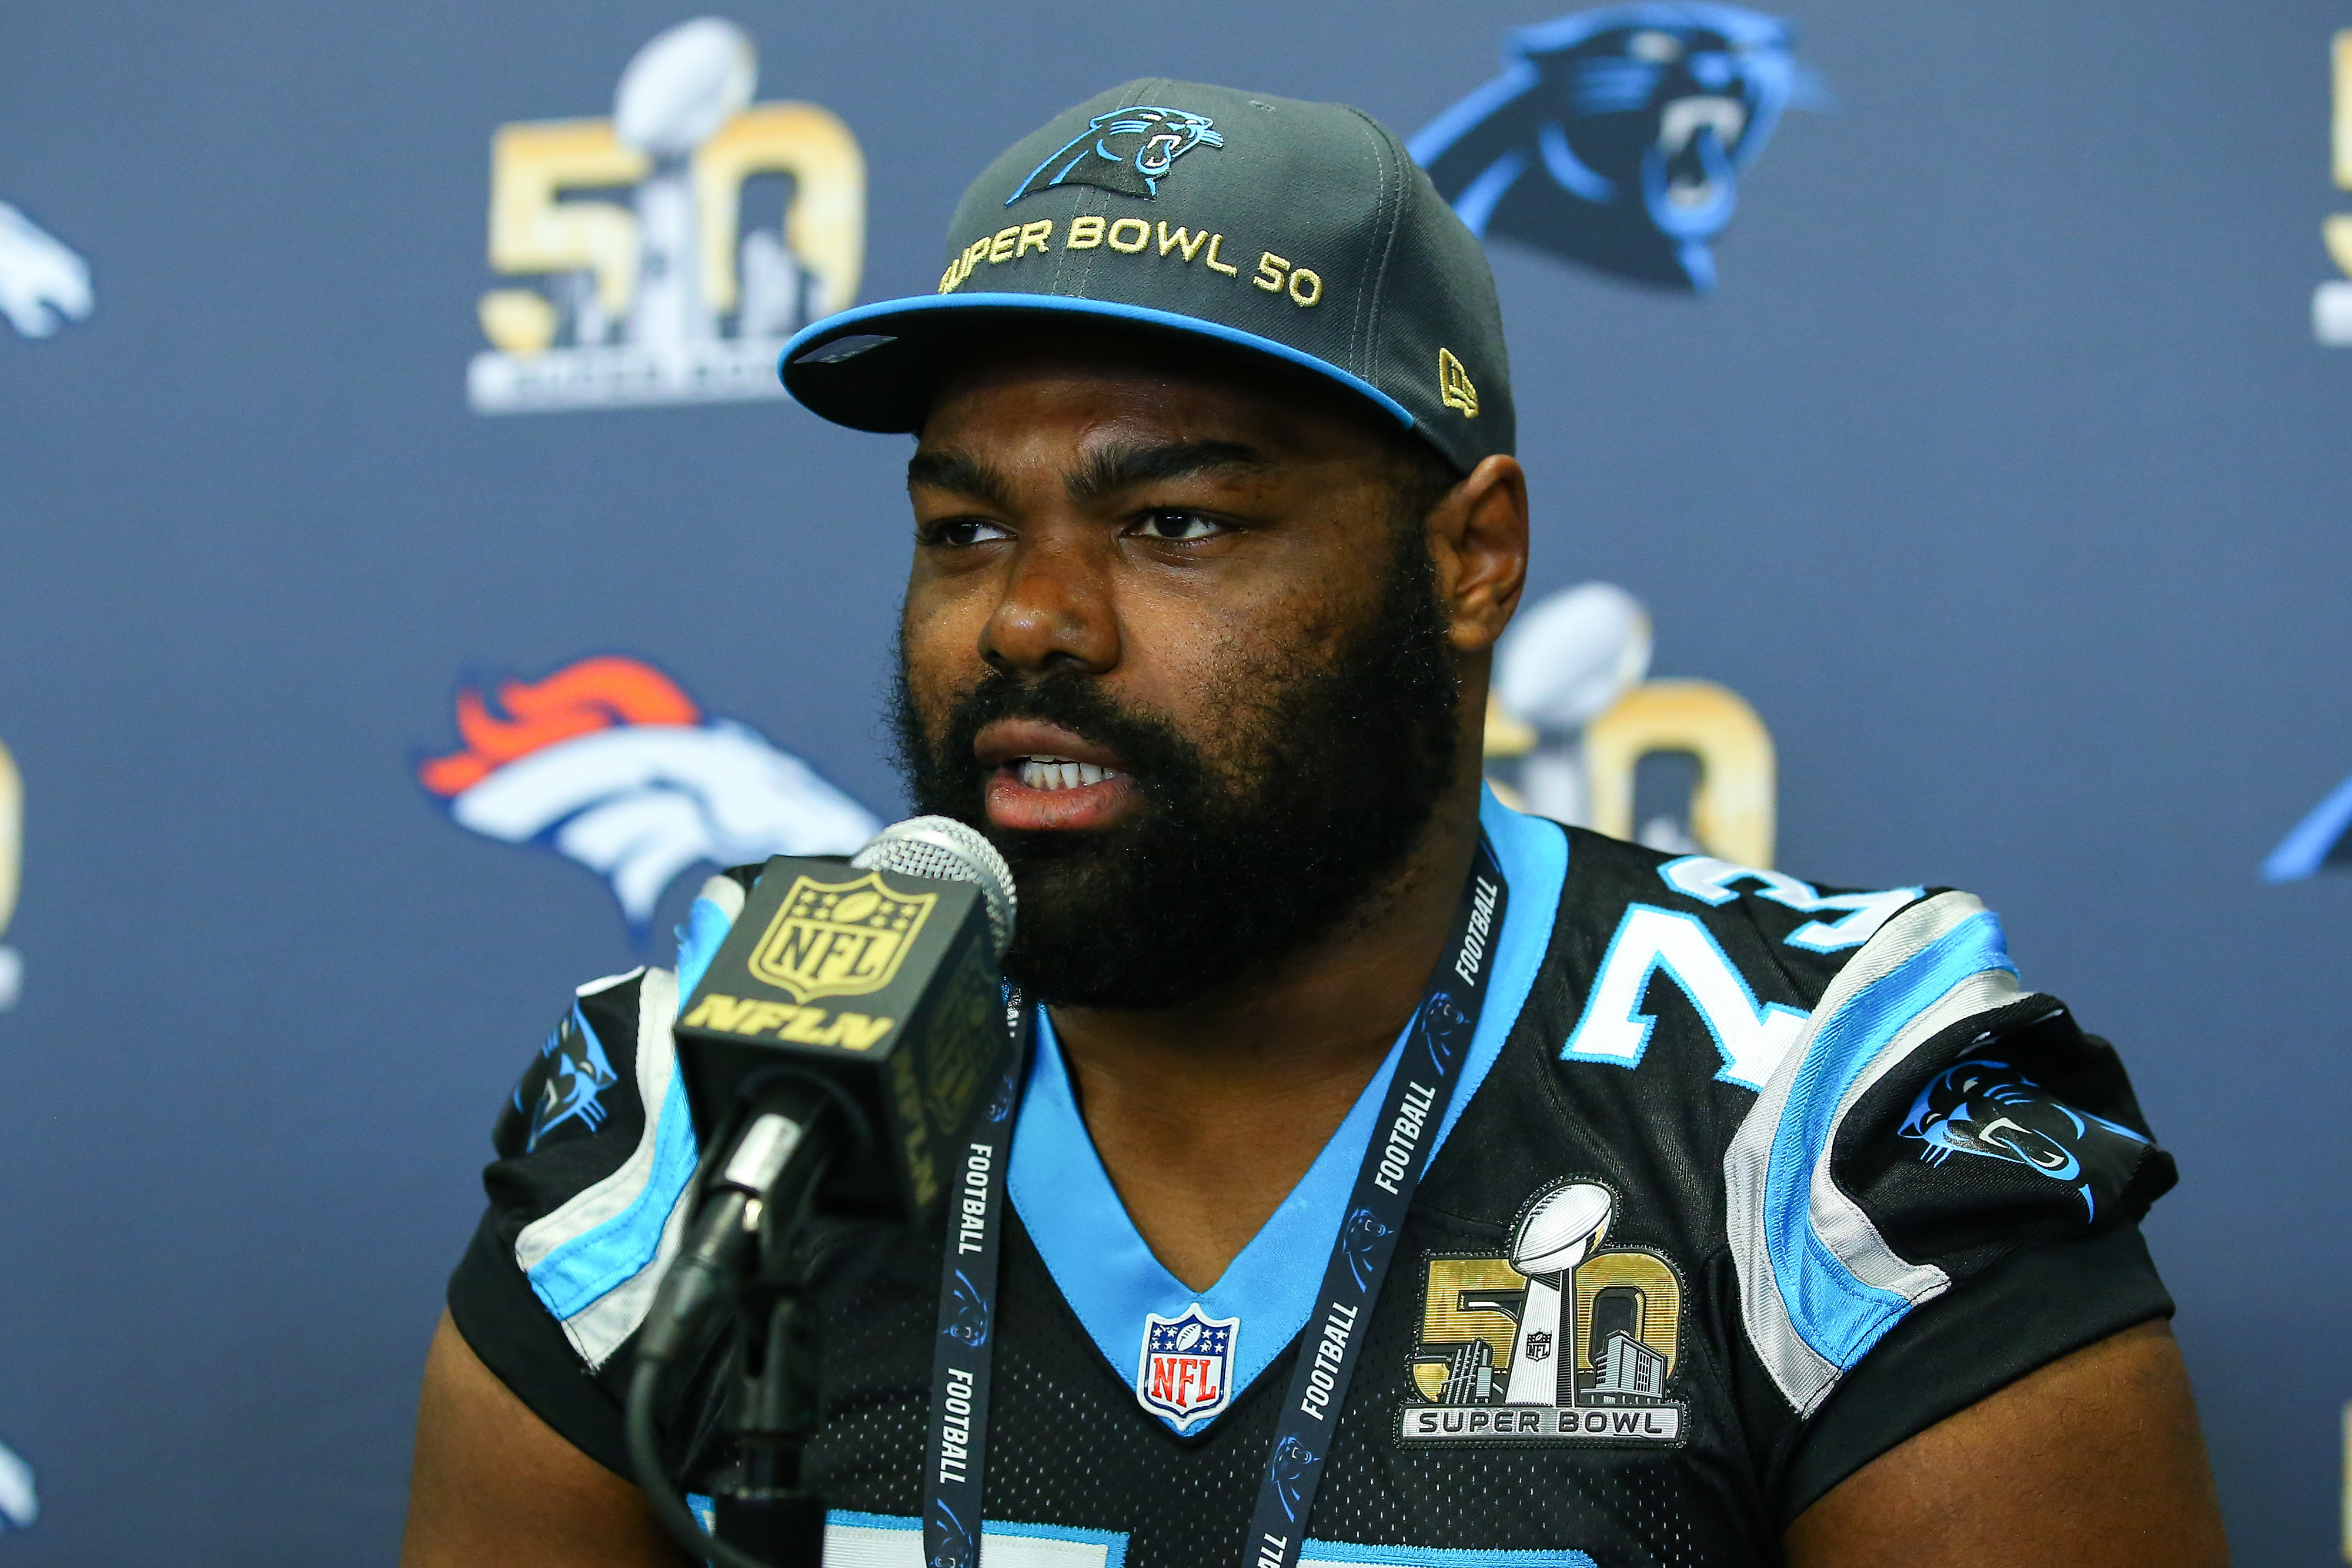 Michael Oher at a press conference for the 50th Super Bowl